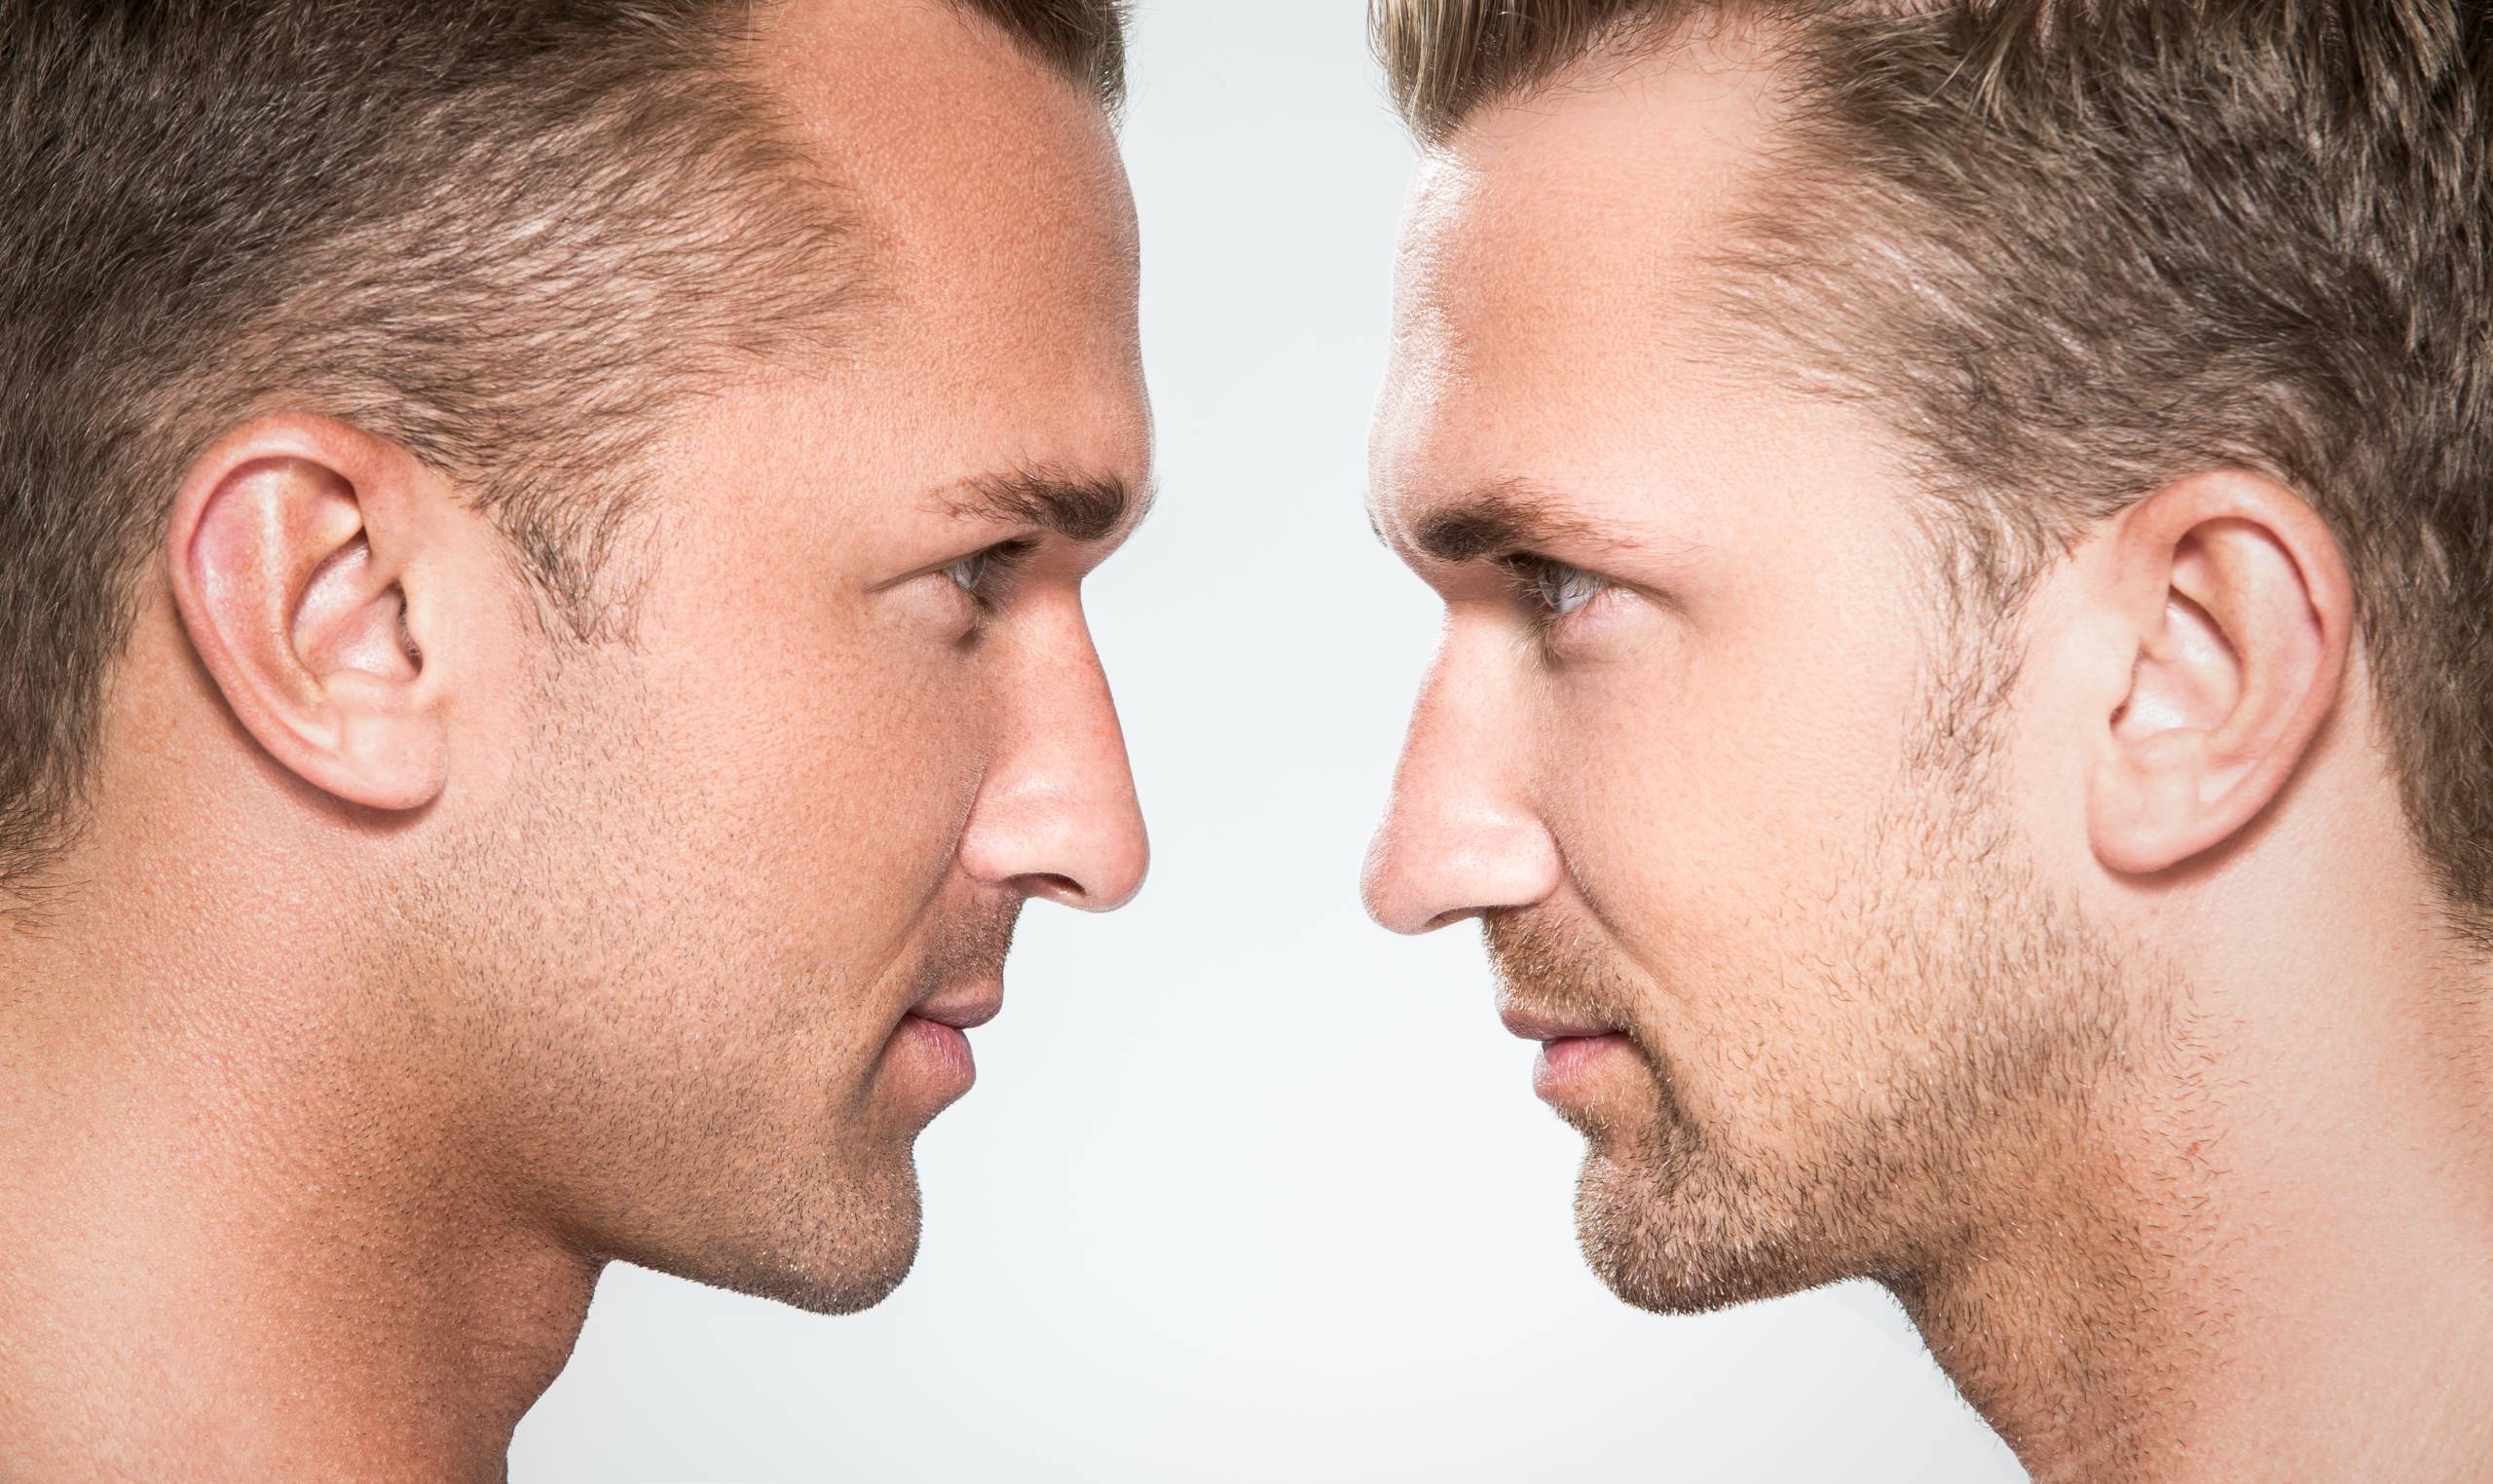 What is Nose Aesthetics for Men?